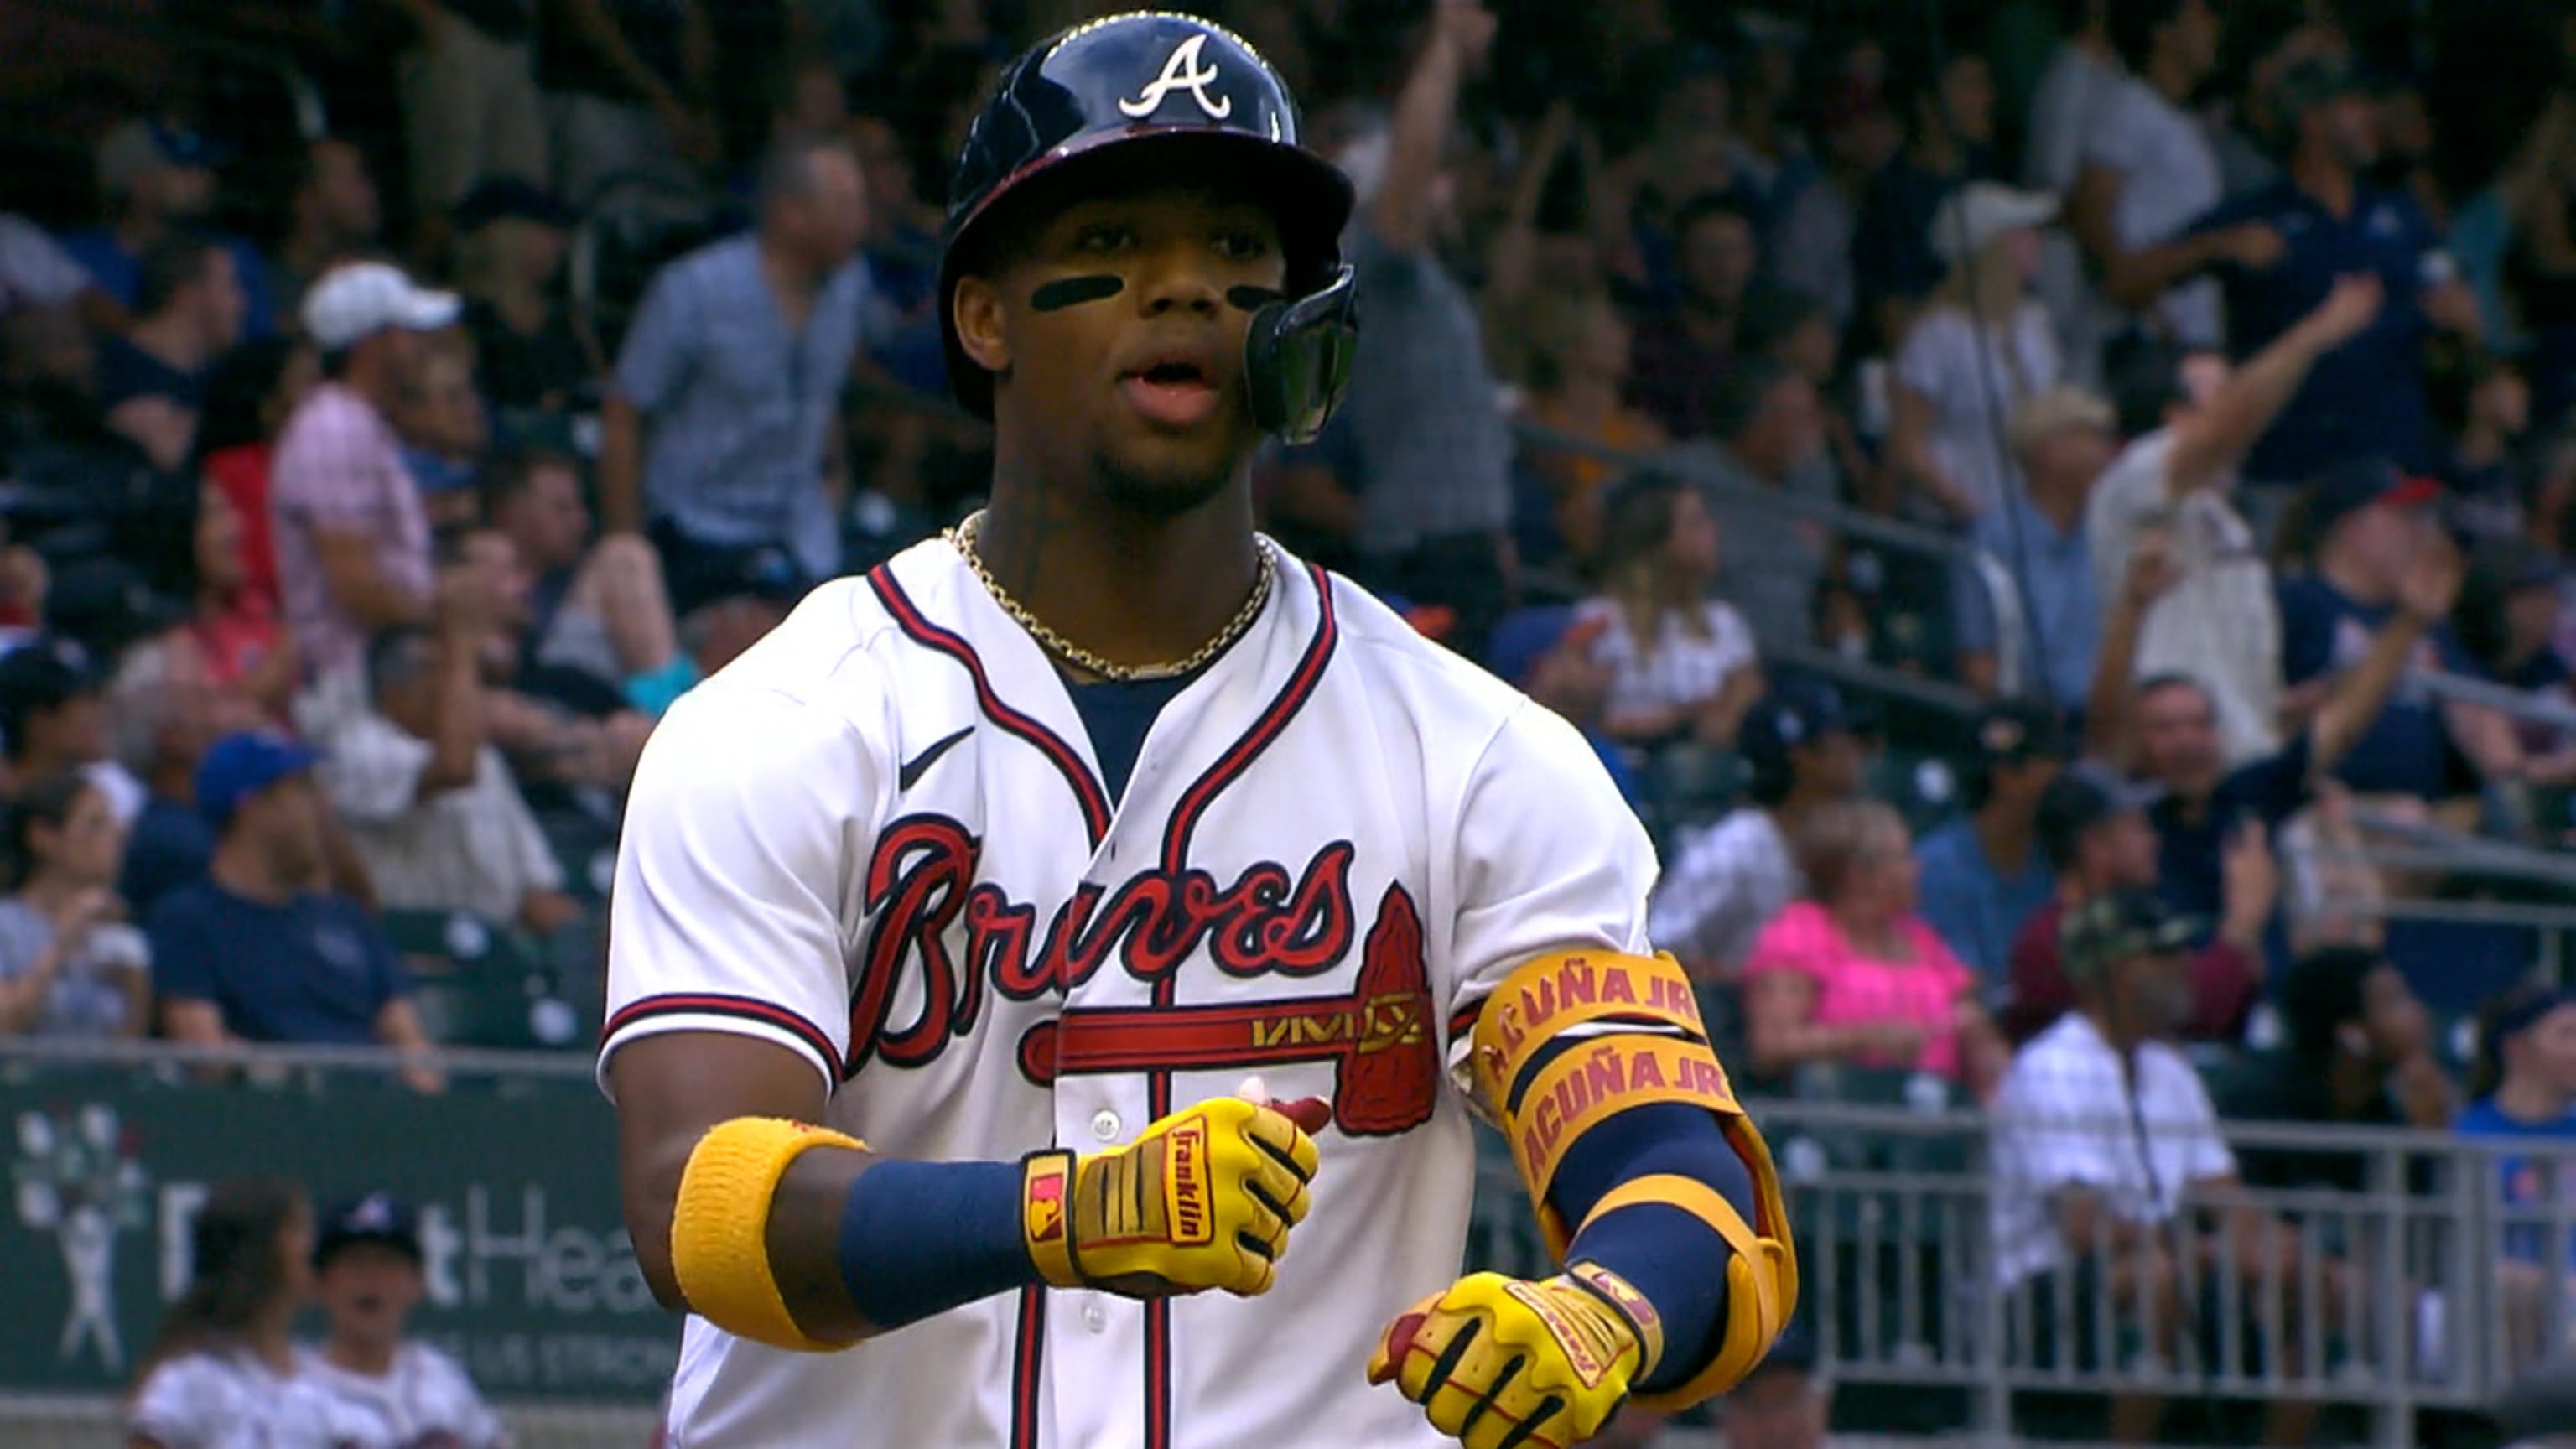 Ronald Acuna Jr.'s All-Star Appearances: How Many Times Was He